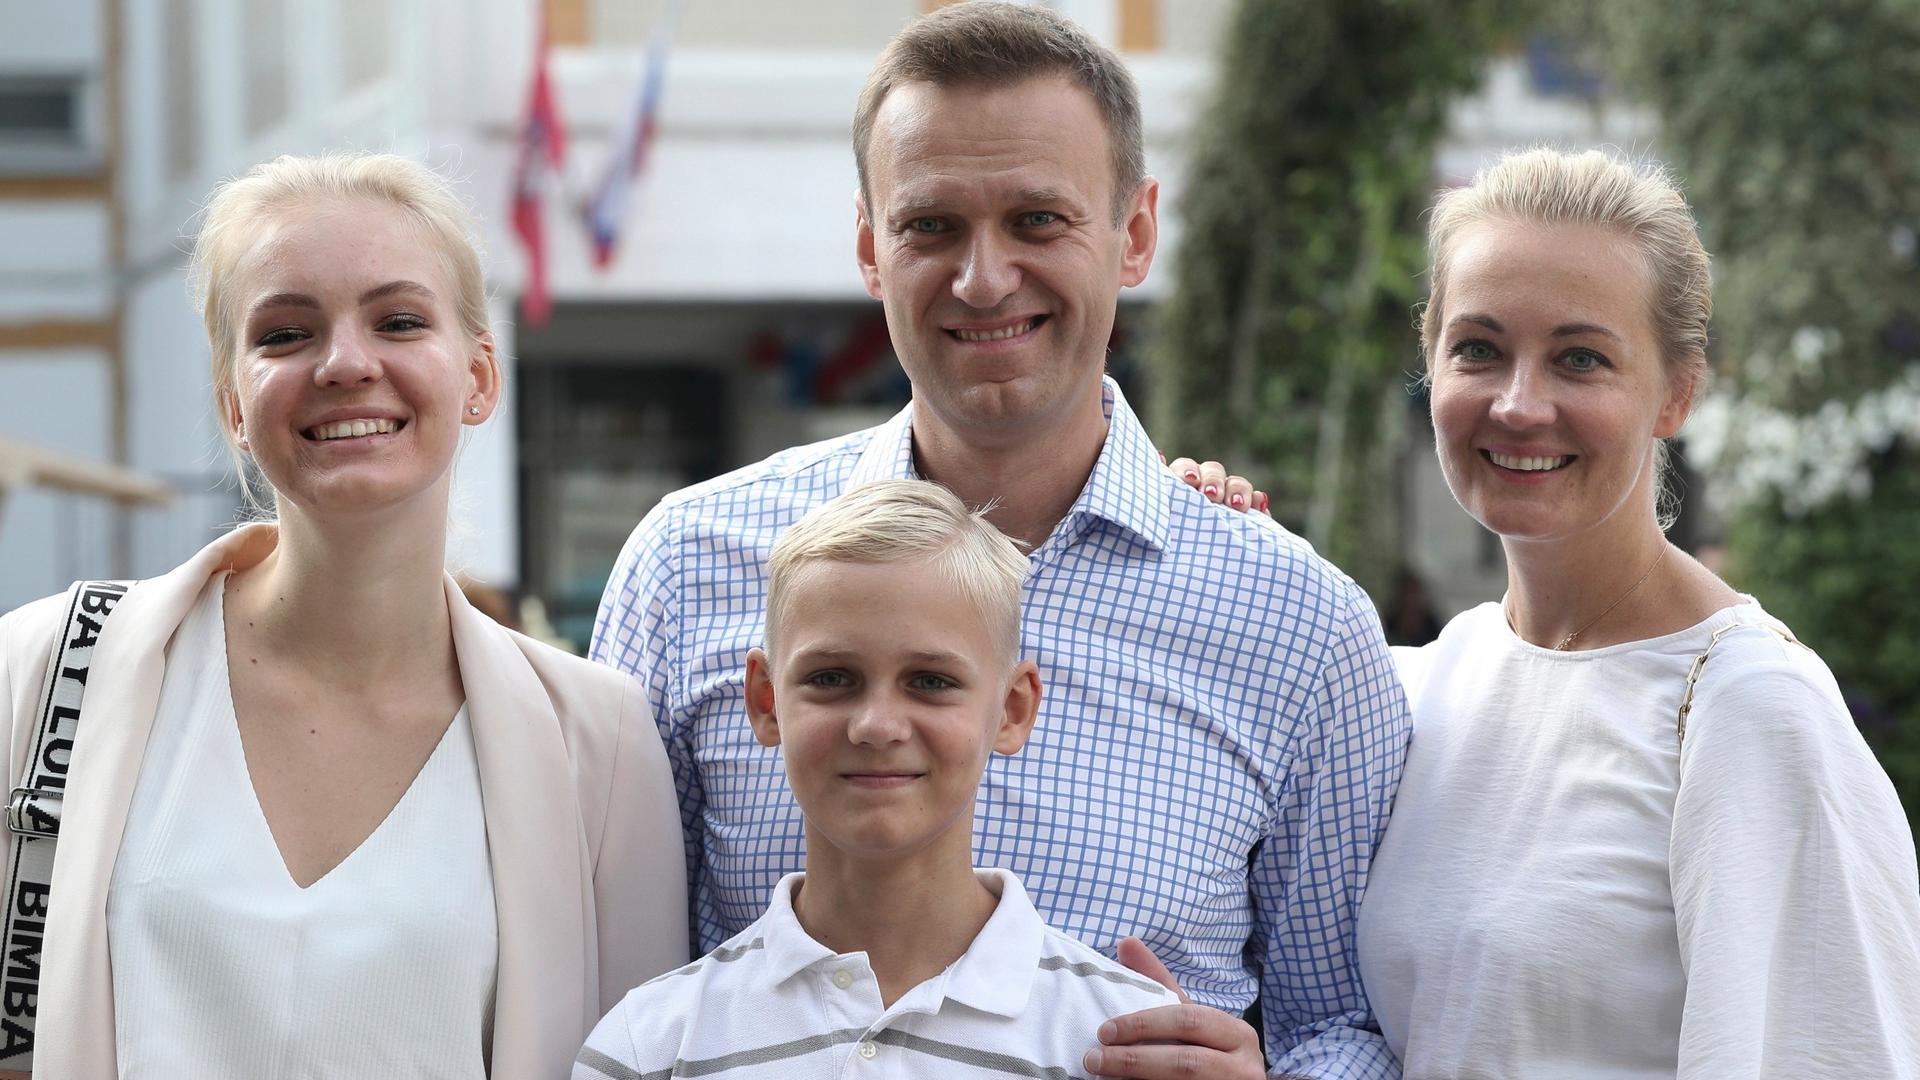 Russian opposition leader Alexei Navalny, with his wife Yulia, right, daughter Daria, and son Zakhar pose for the media after voting during a city council election in Moscow, Russia.